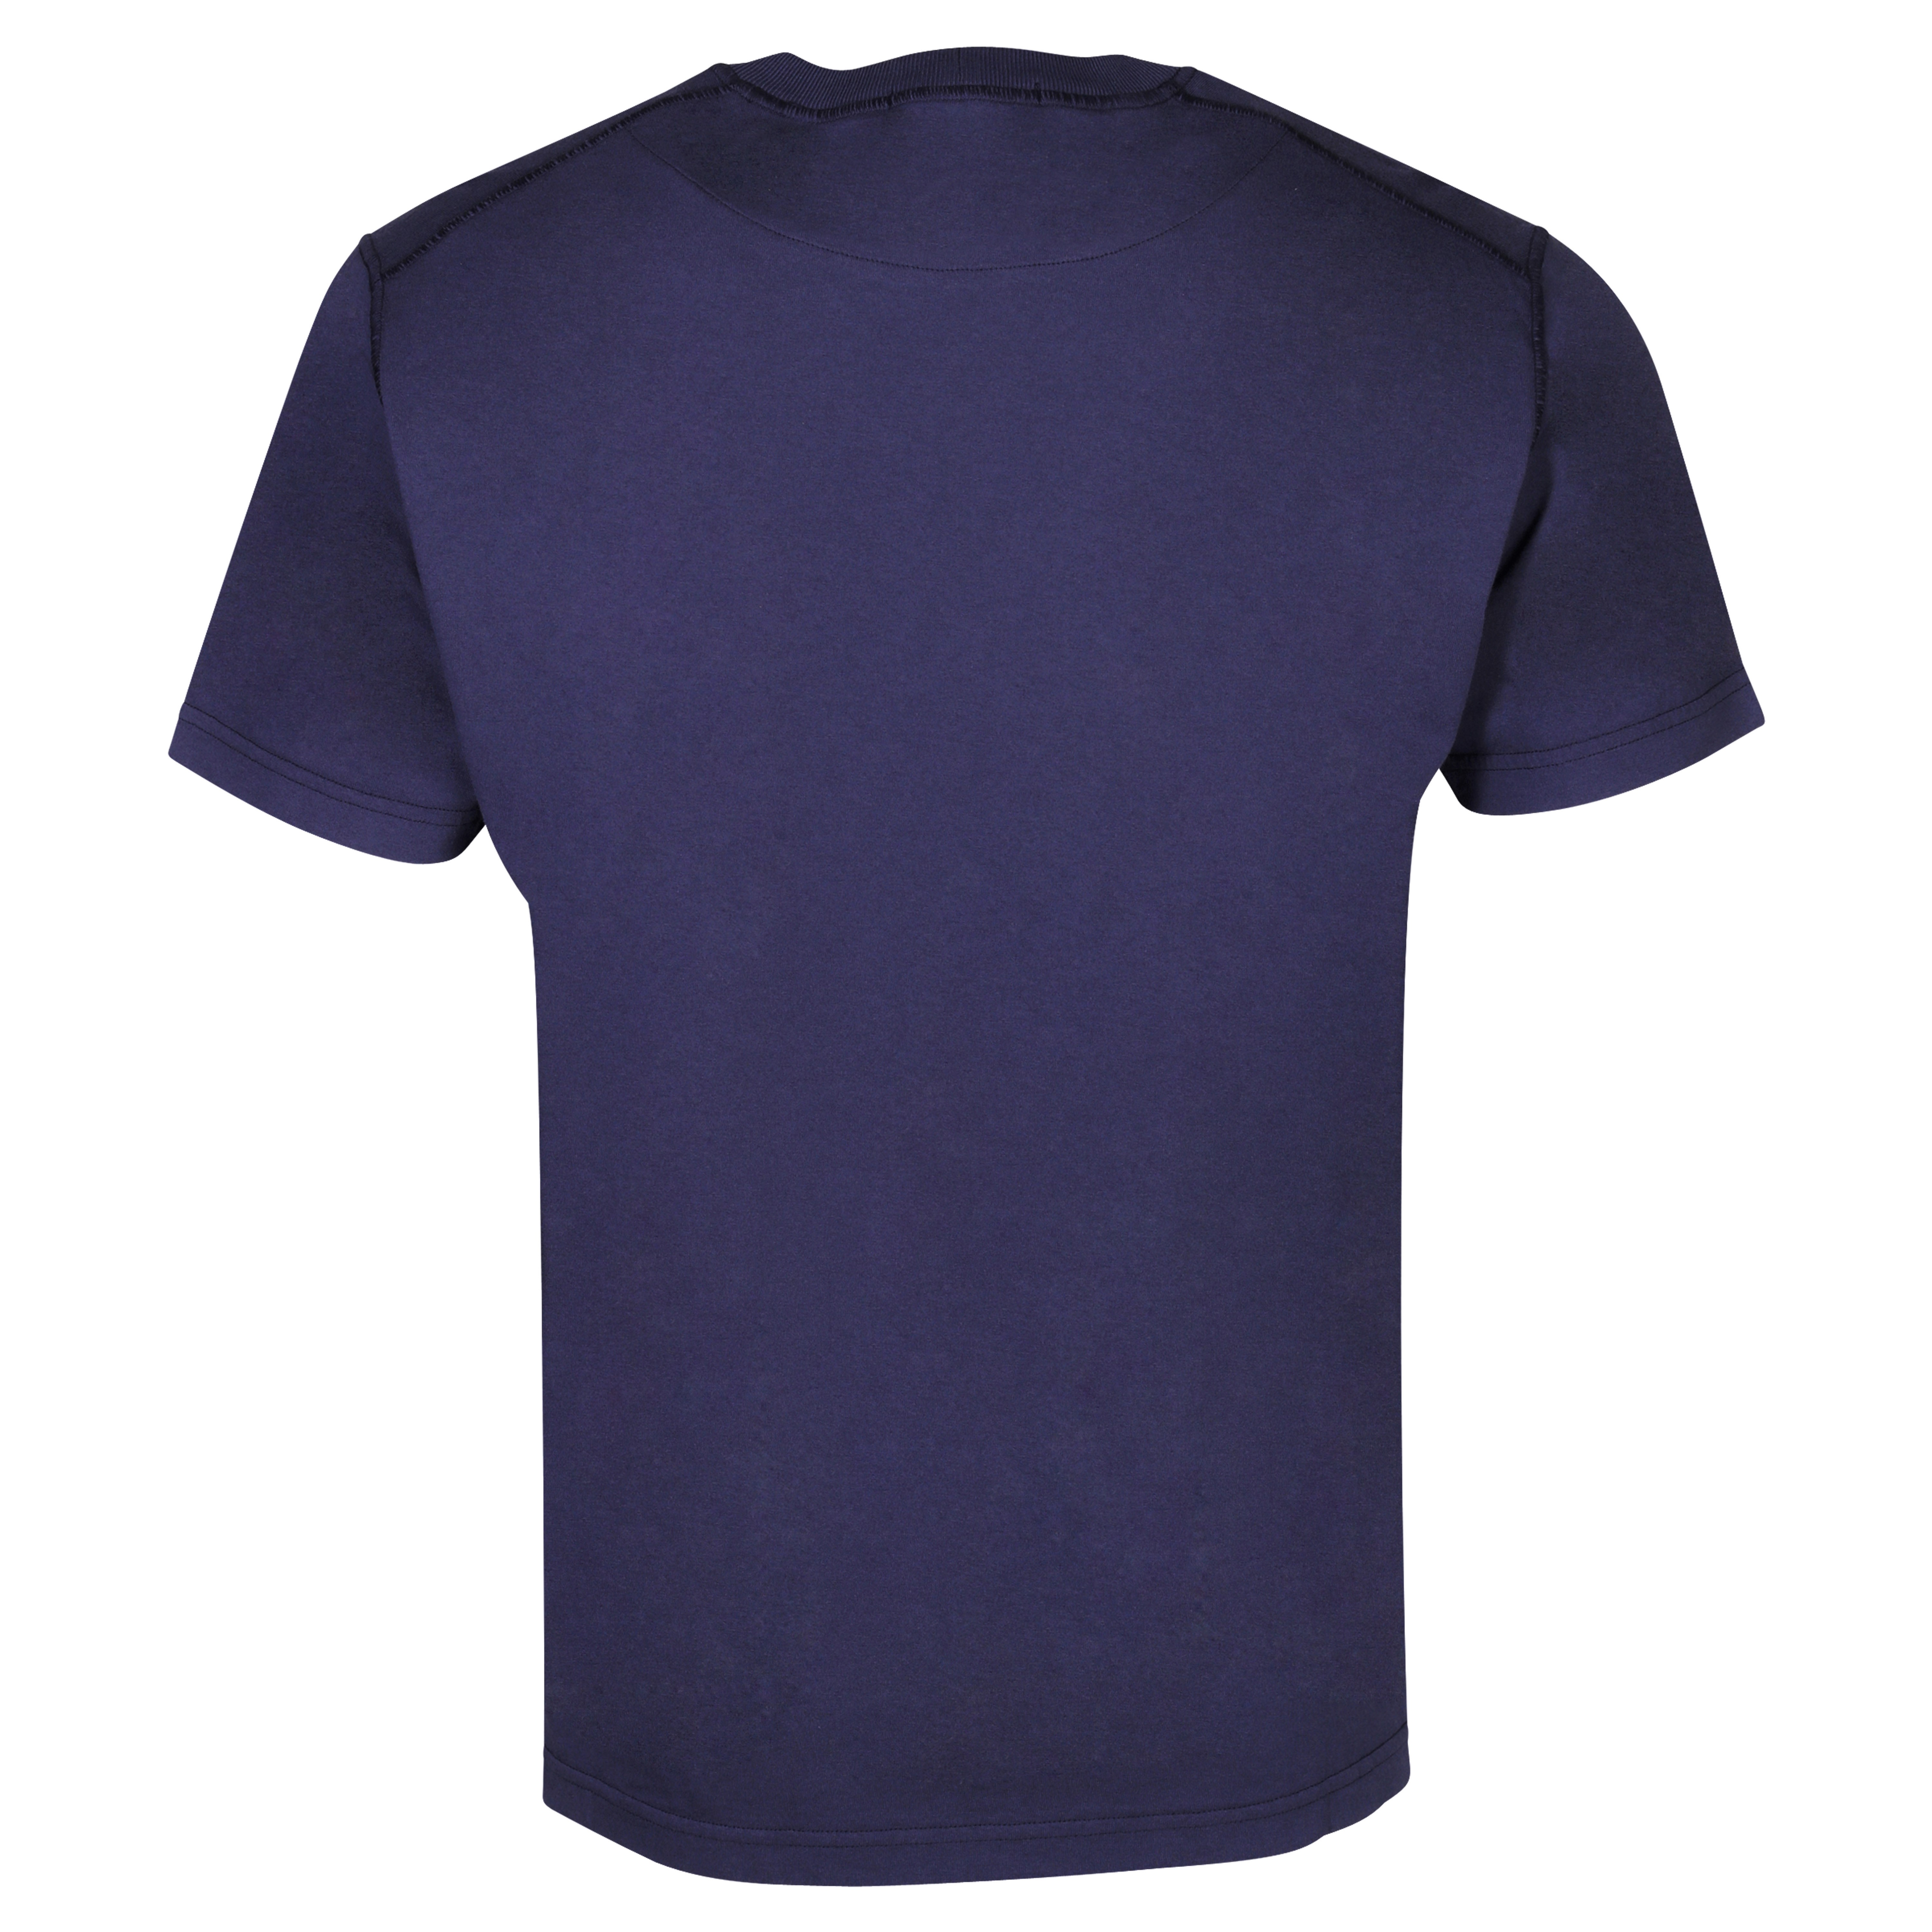 Stone Island T-Shirt in Royal Blue S